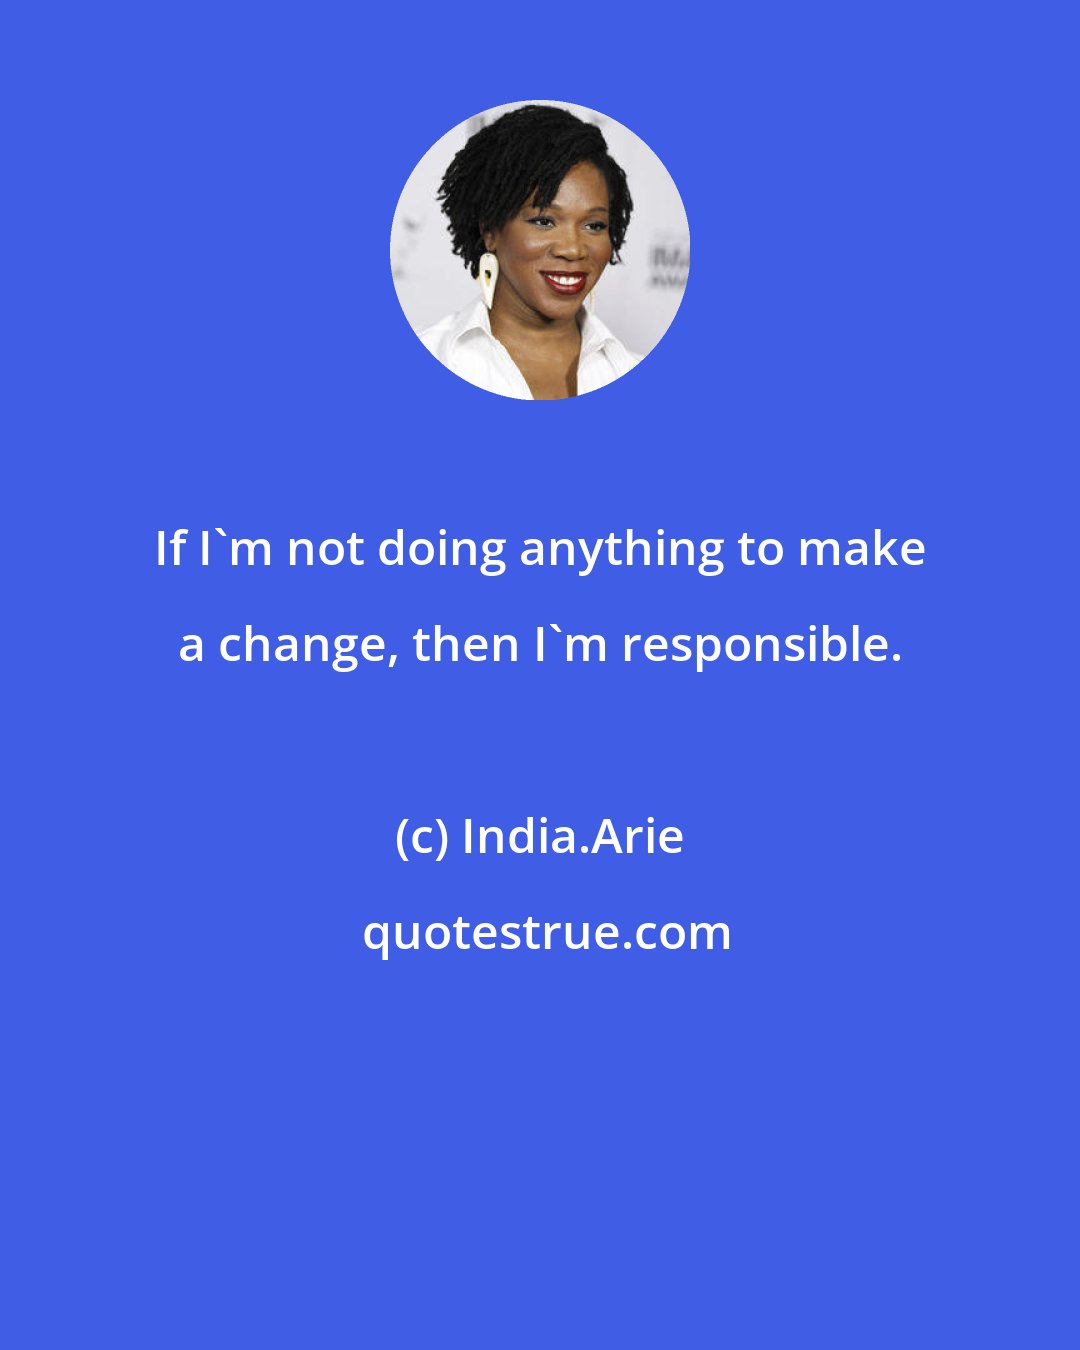 India.Arie: If I'm not doing anything to make a change, then I'm responsible.